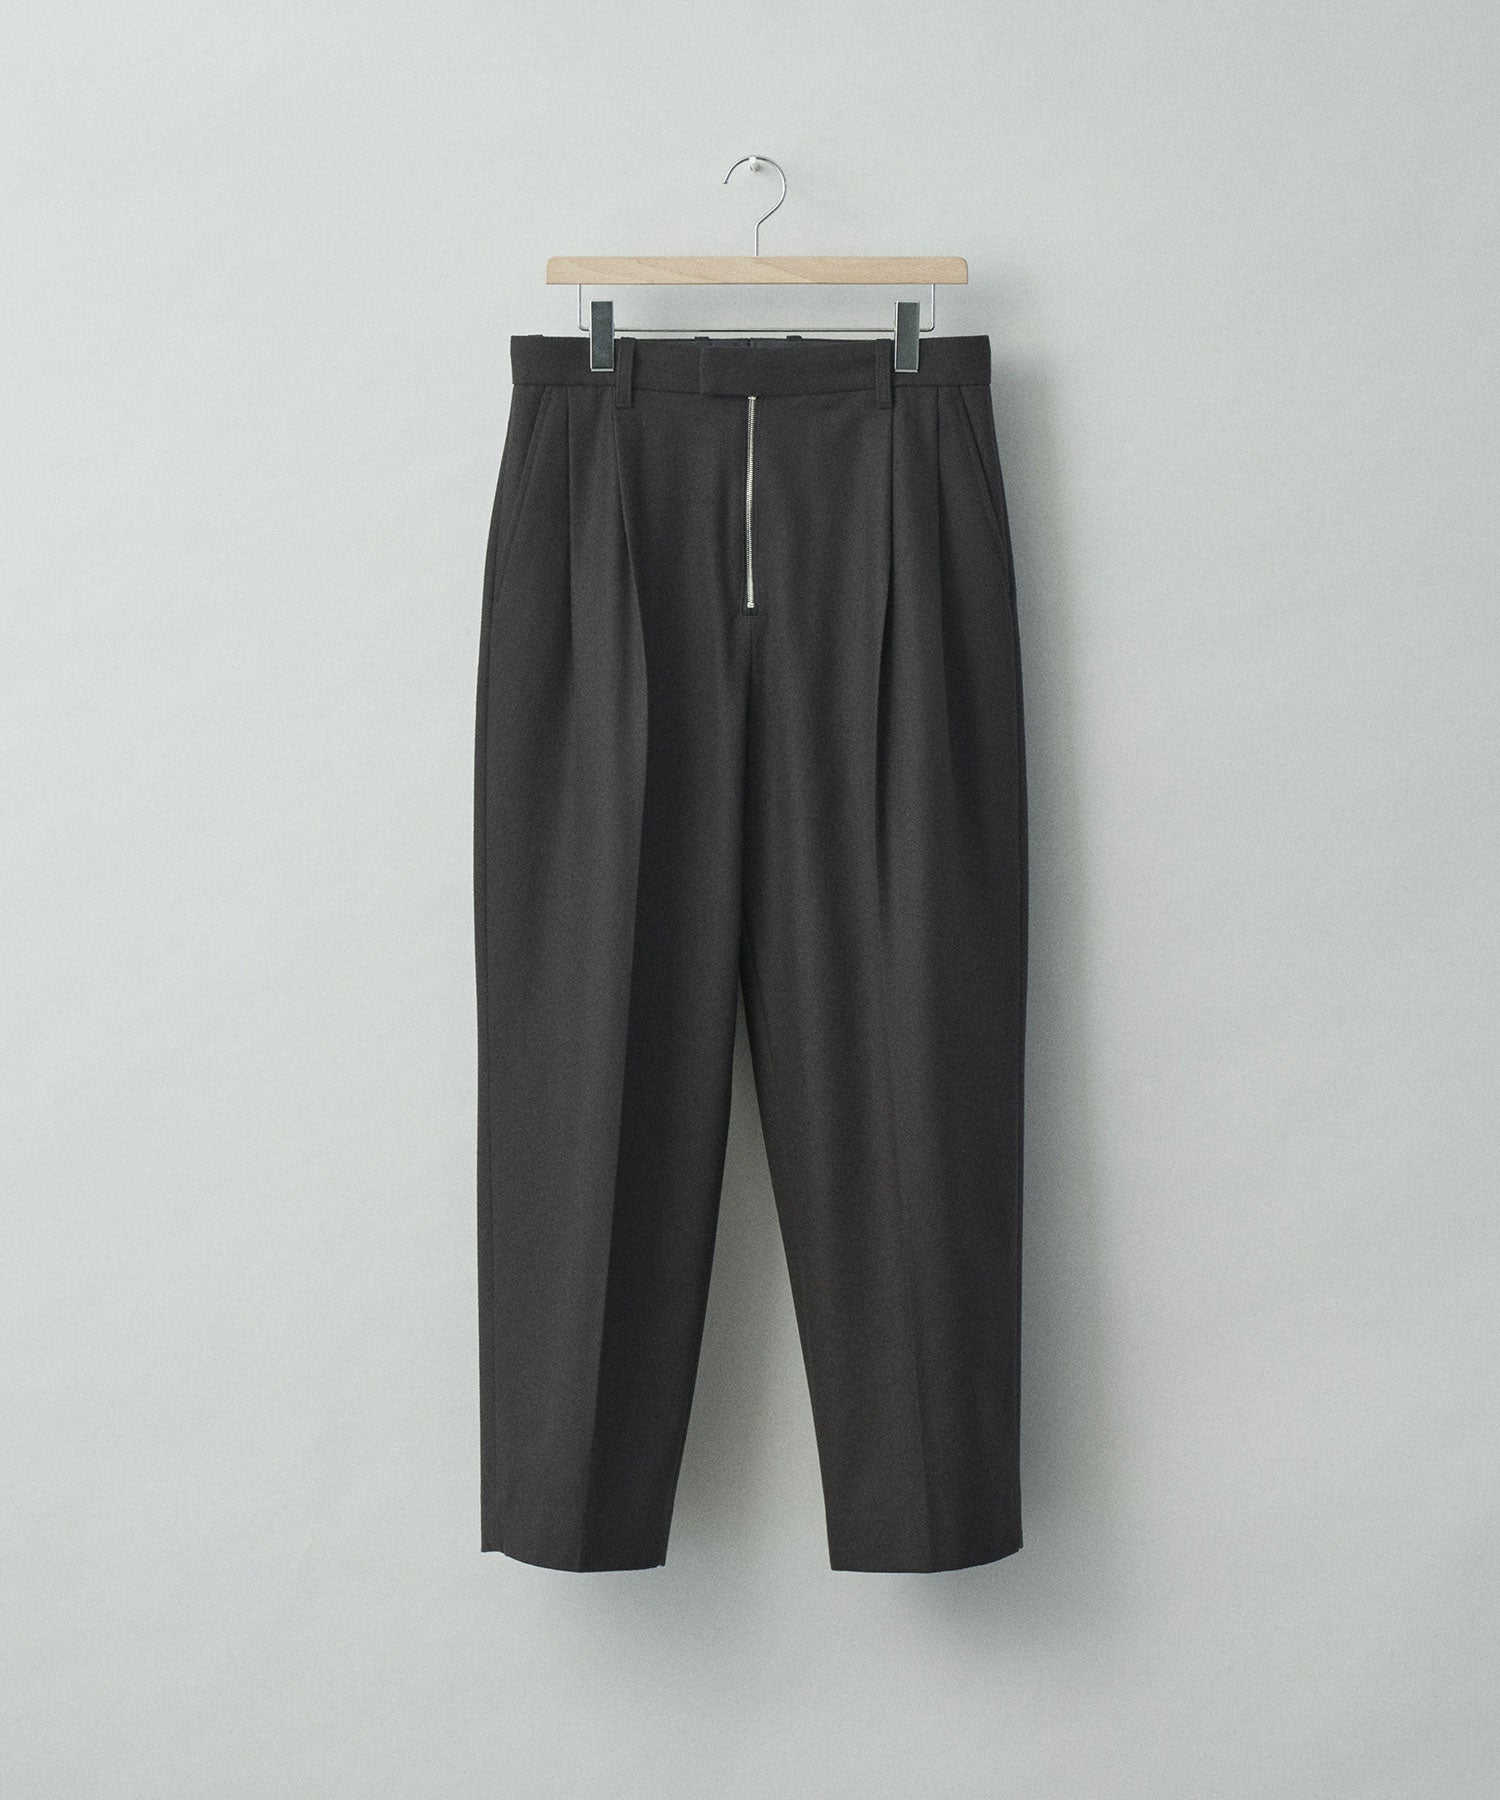 stein(シュタイン)の22AWコレクションのEX WIDE TAPERED BARE ZIP TROUSERSのメルトンタイプのSHADE CHARCOAL